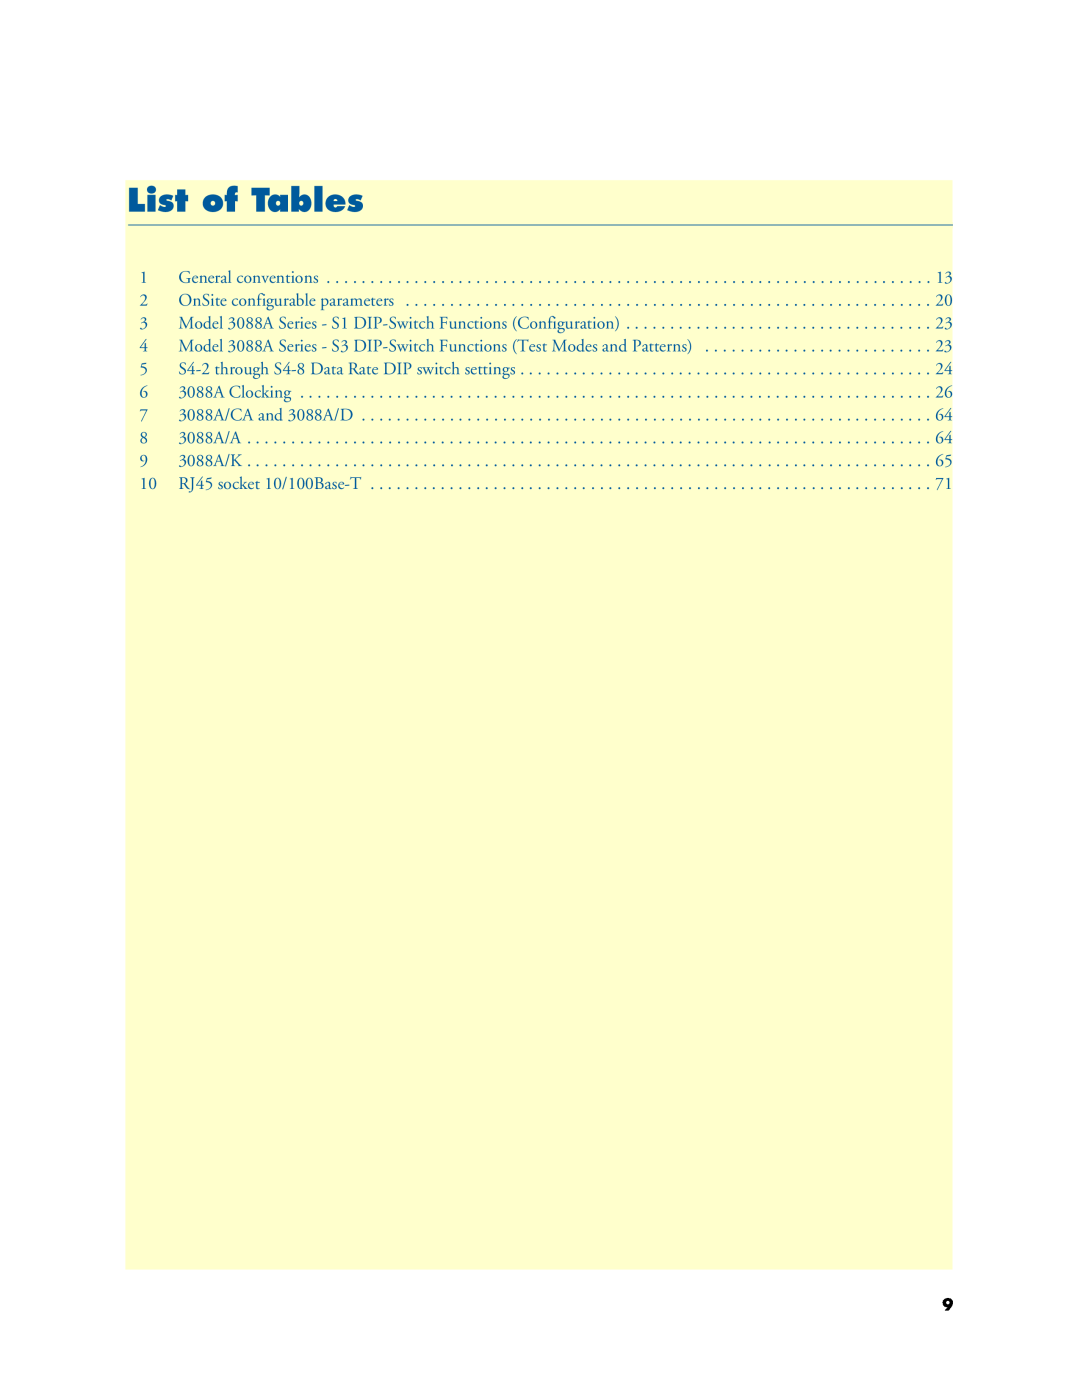 Patton electronic 3088A manual List of Tables 